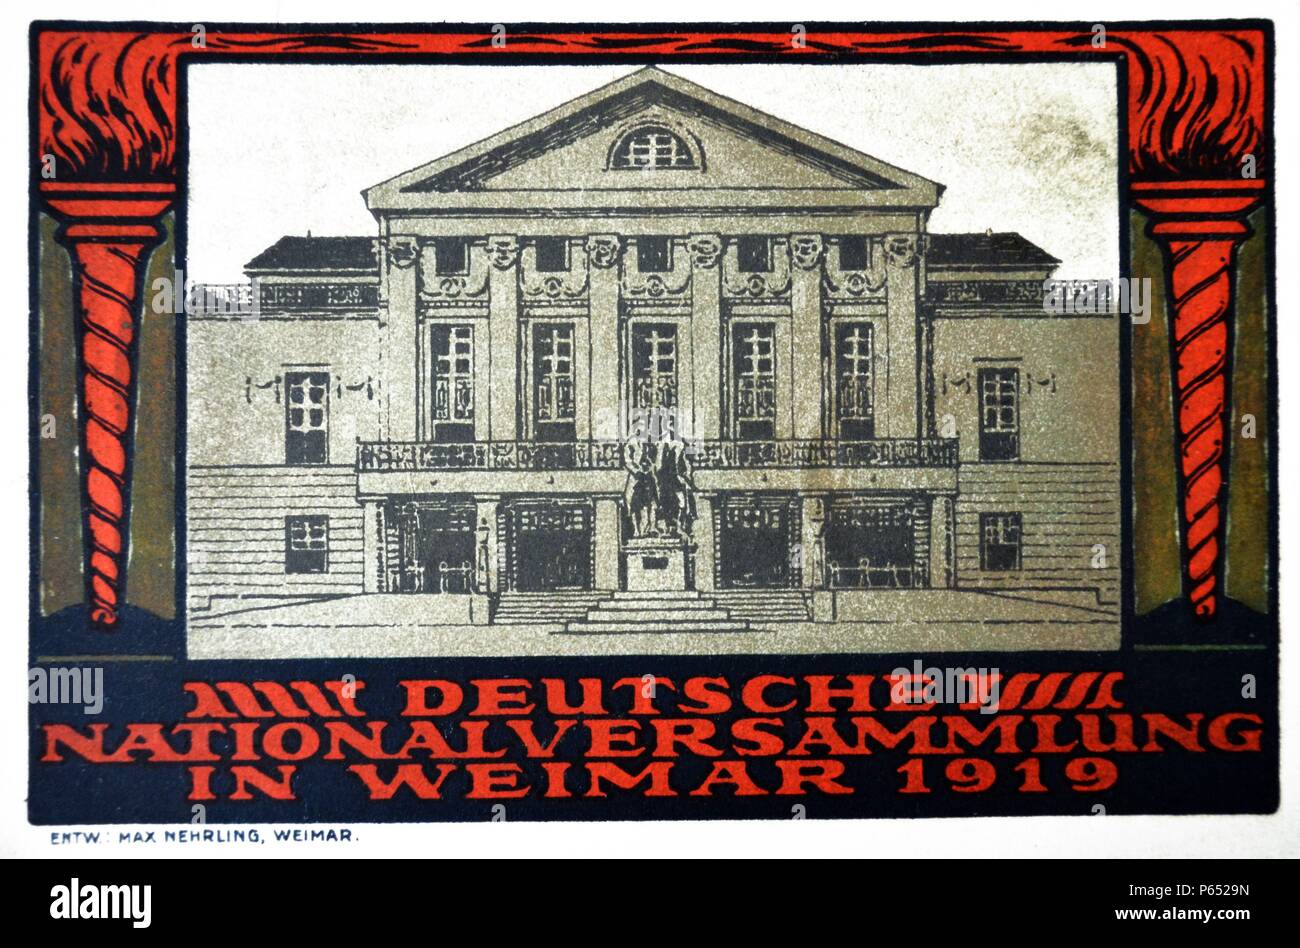 The German national assembly in Weimar in 1919 Stock Photo